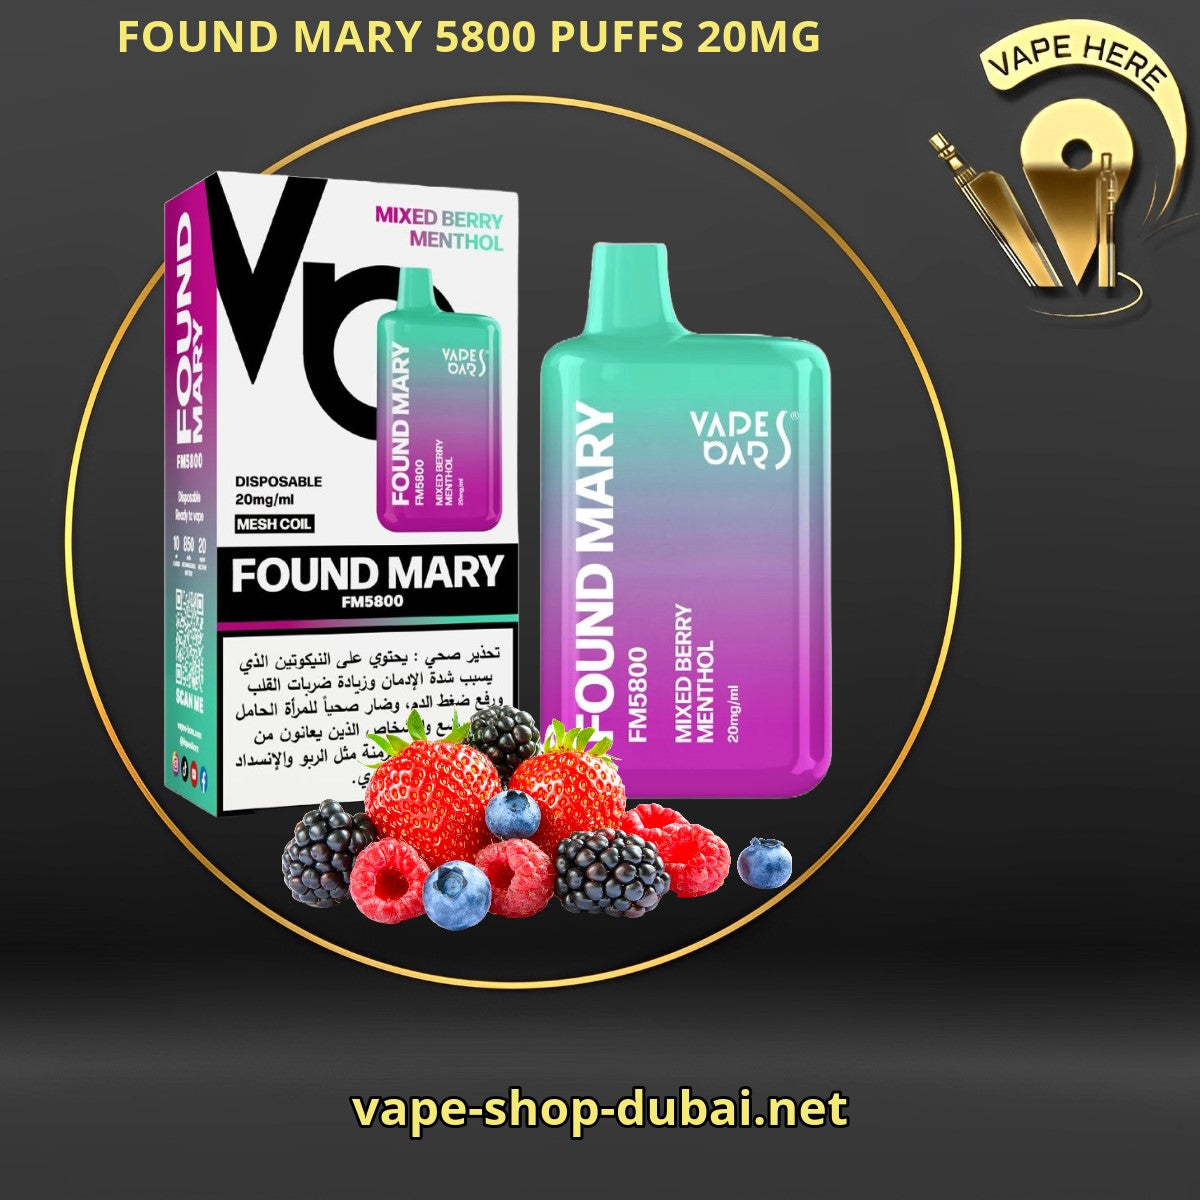 FOUND MARY FM 5800 PUFFS 20MG Mixed Berries Menthol DISPOSABLE VAPE BY VAPE BARS UAE Abu Dhabi